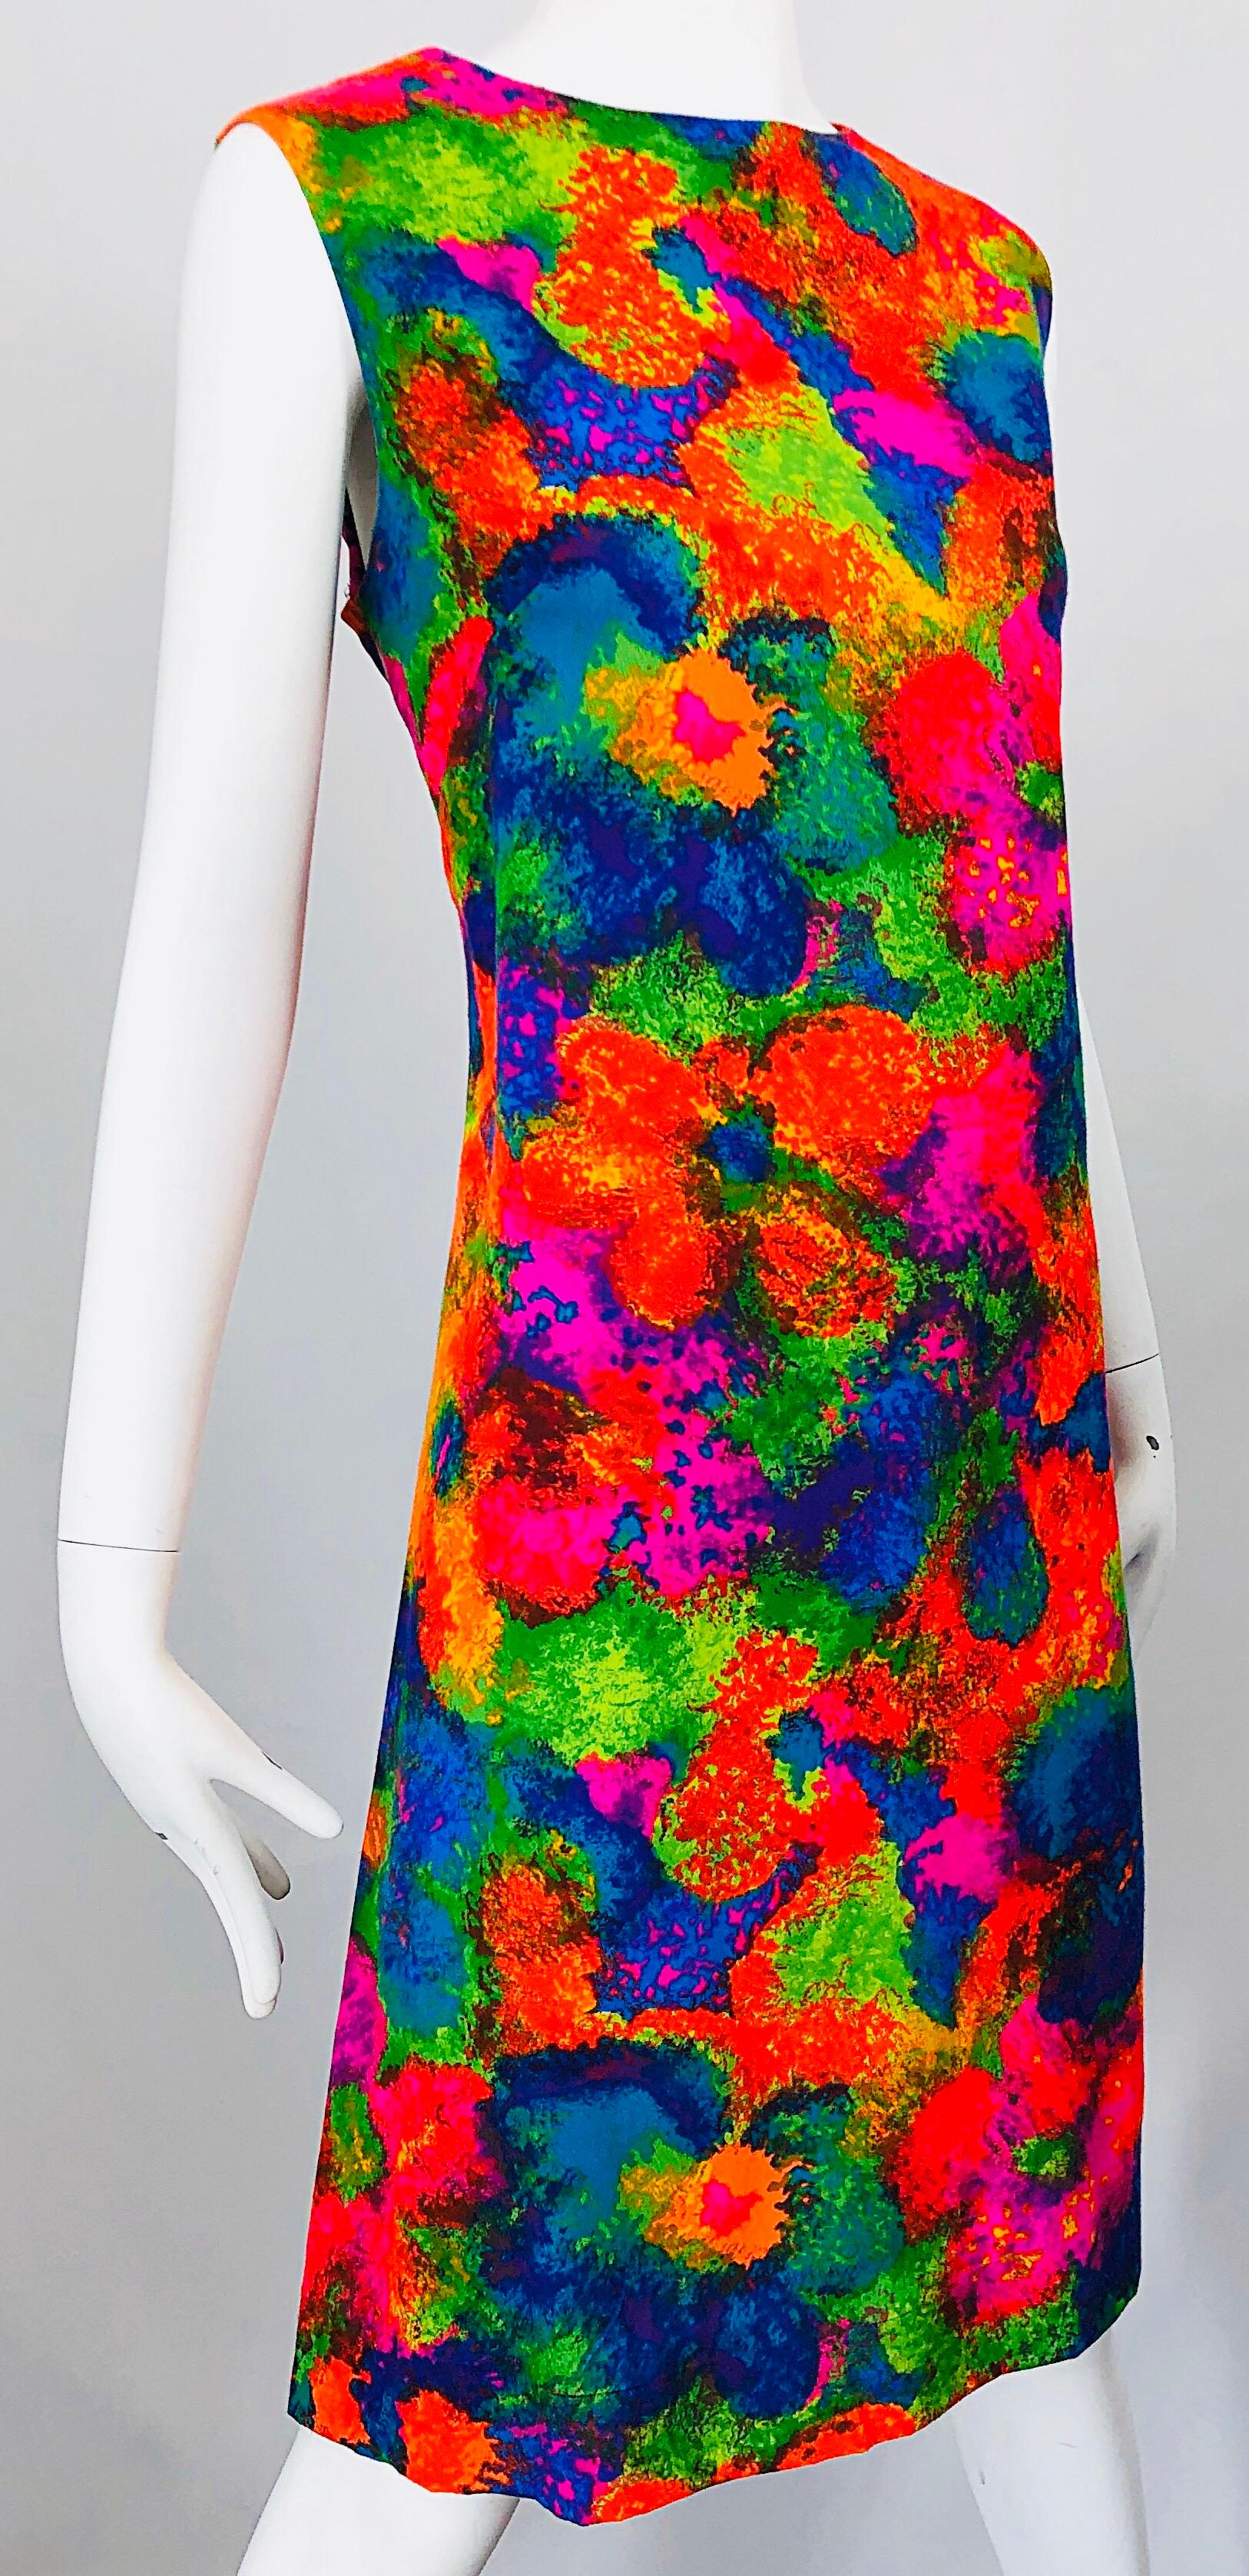 Chic 1960s Larger Size Neon Abstract Flower Print Vintage 60s Cotton Shift Dress For Sale 1